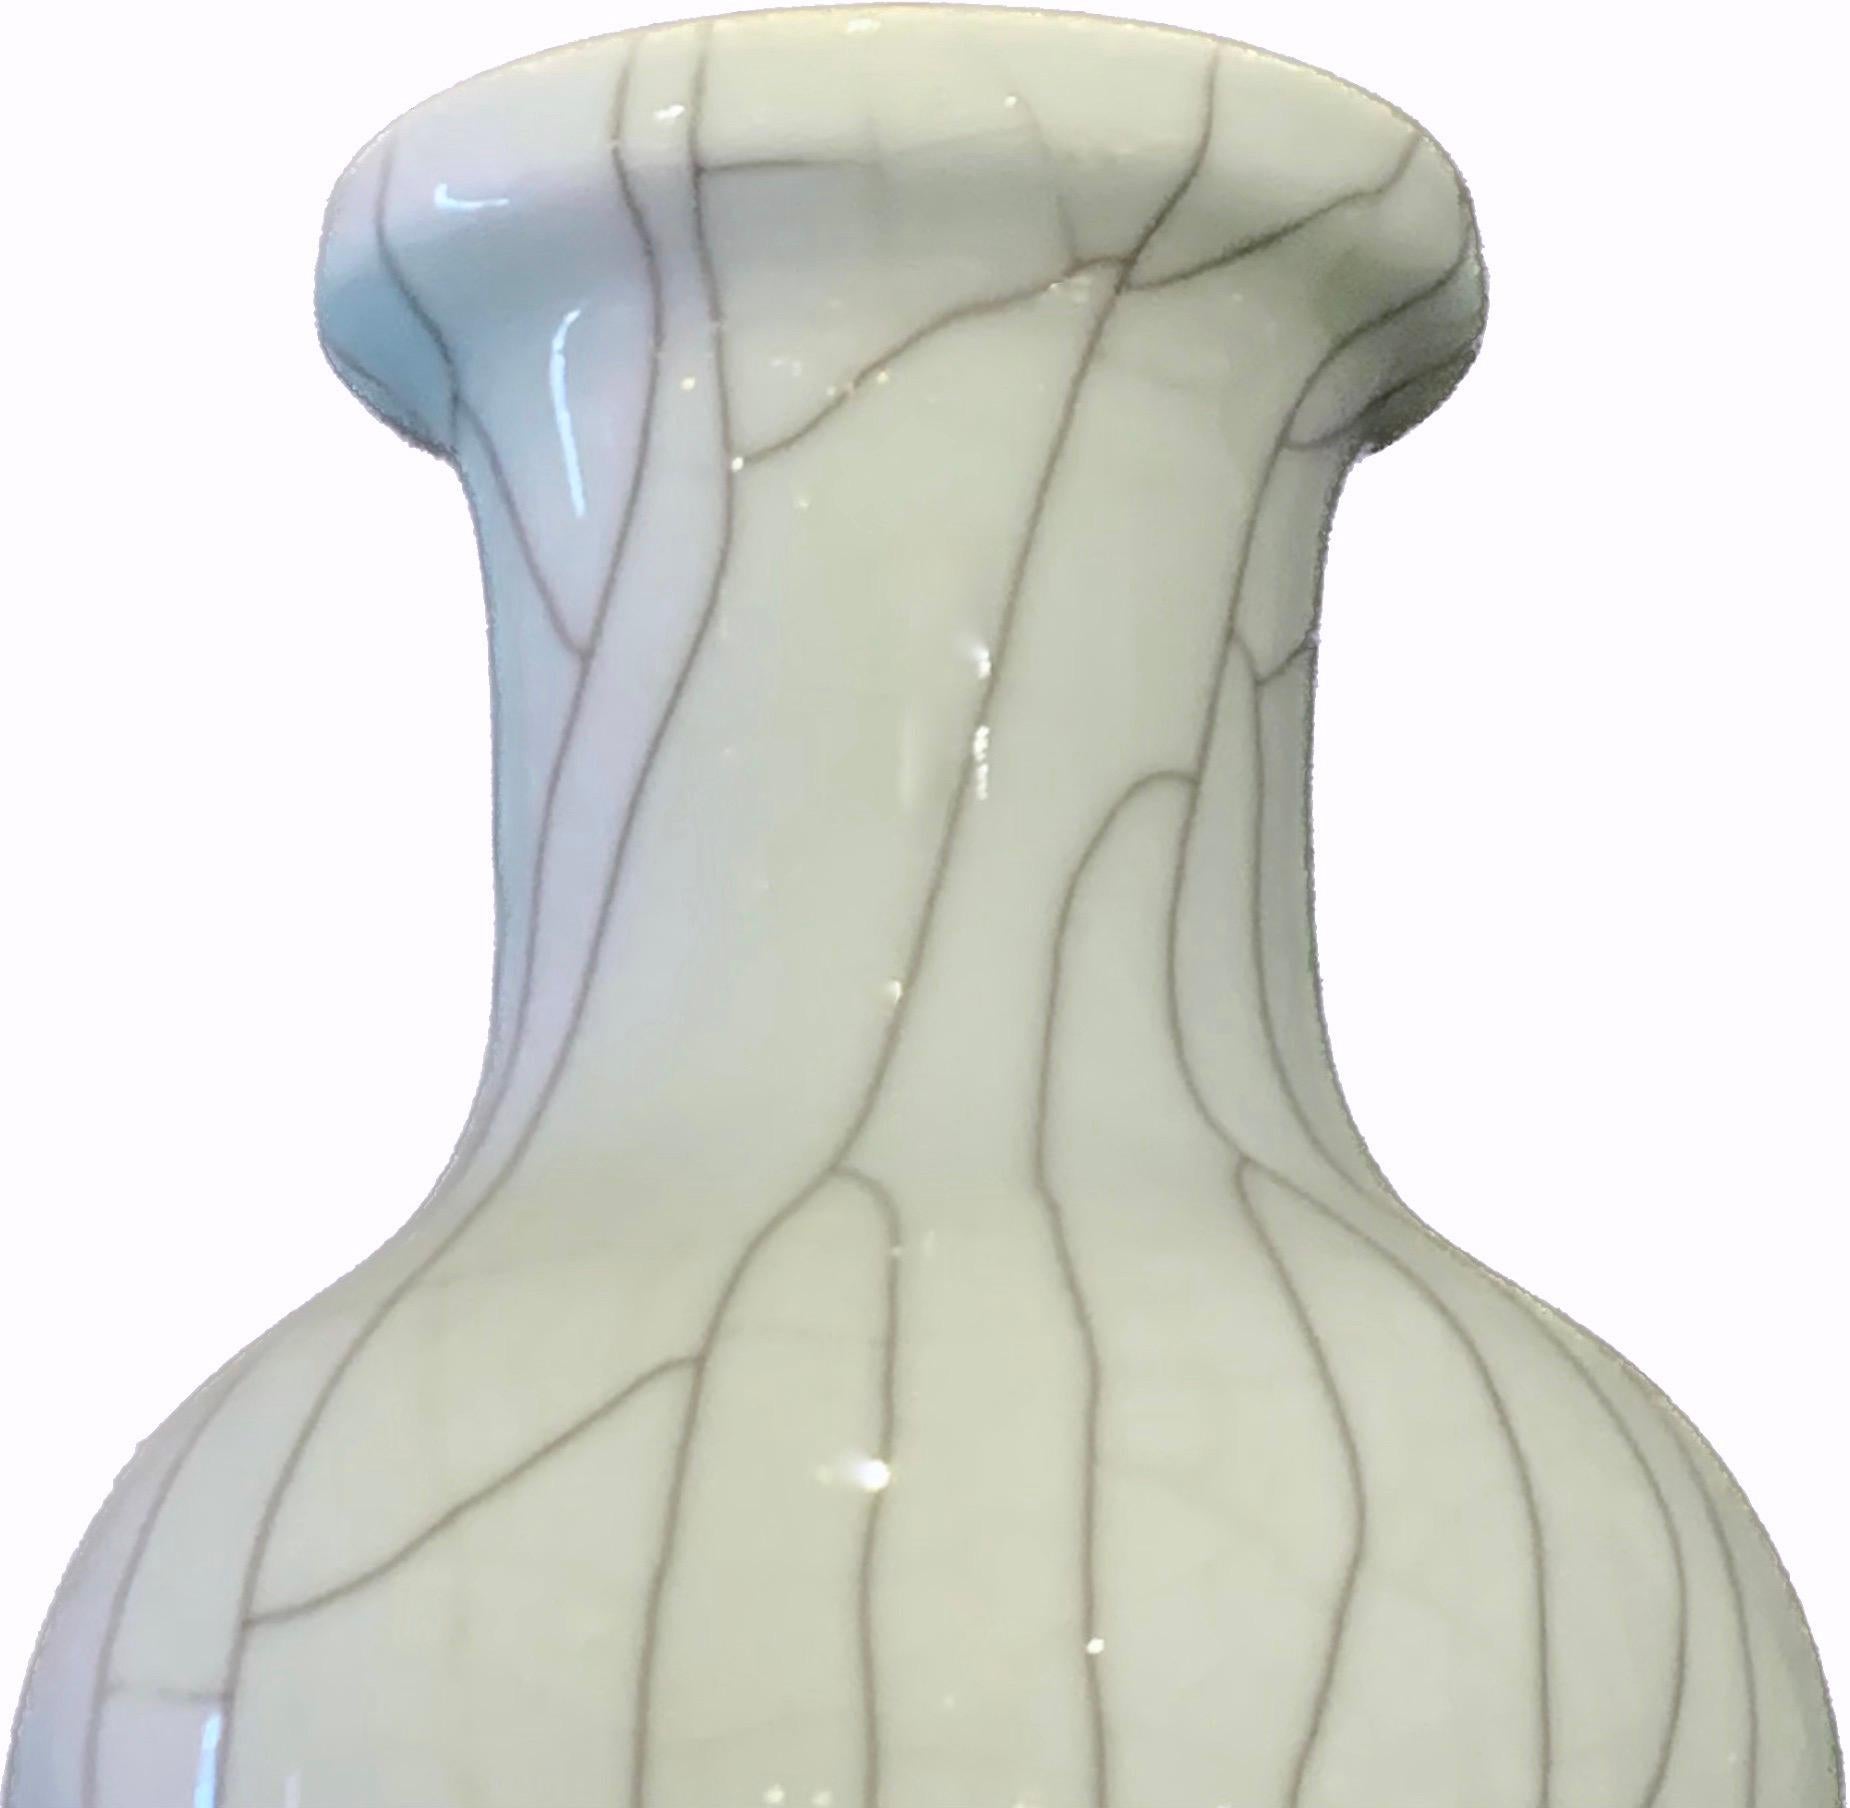 Contemporary Chinese washed pale blue crackle ceramic vase.
Handmade
Available in a similar shape with a different lip S4339B.

.